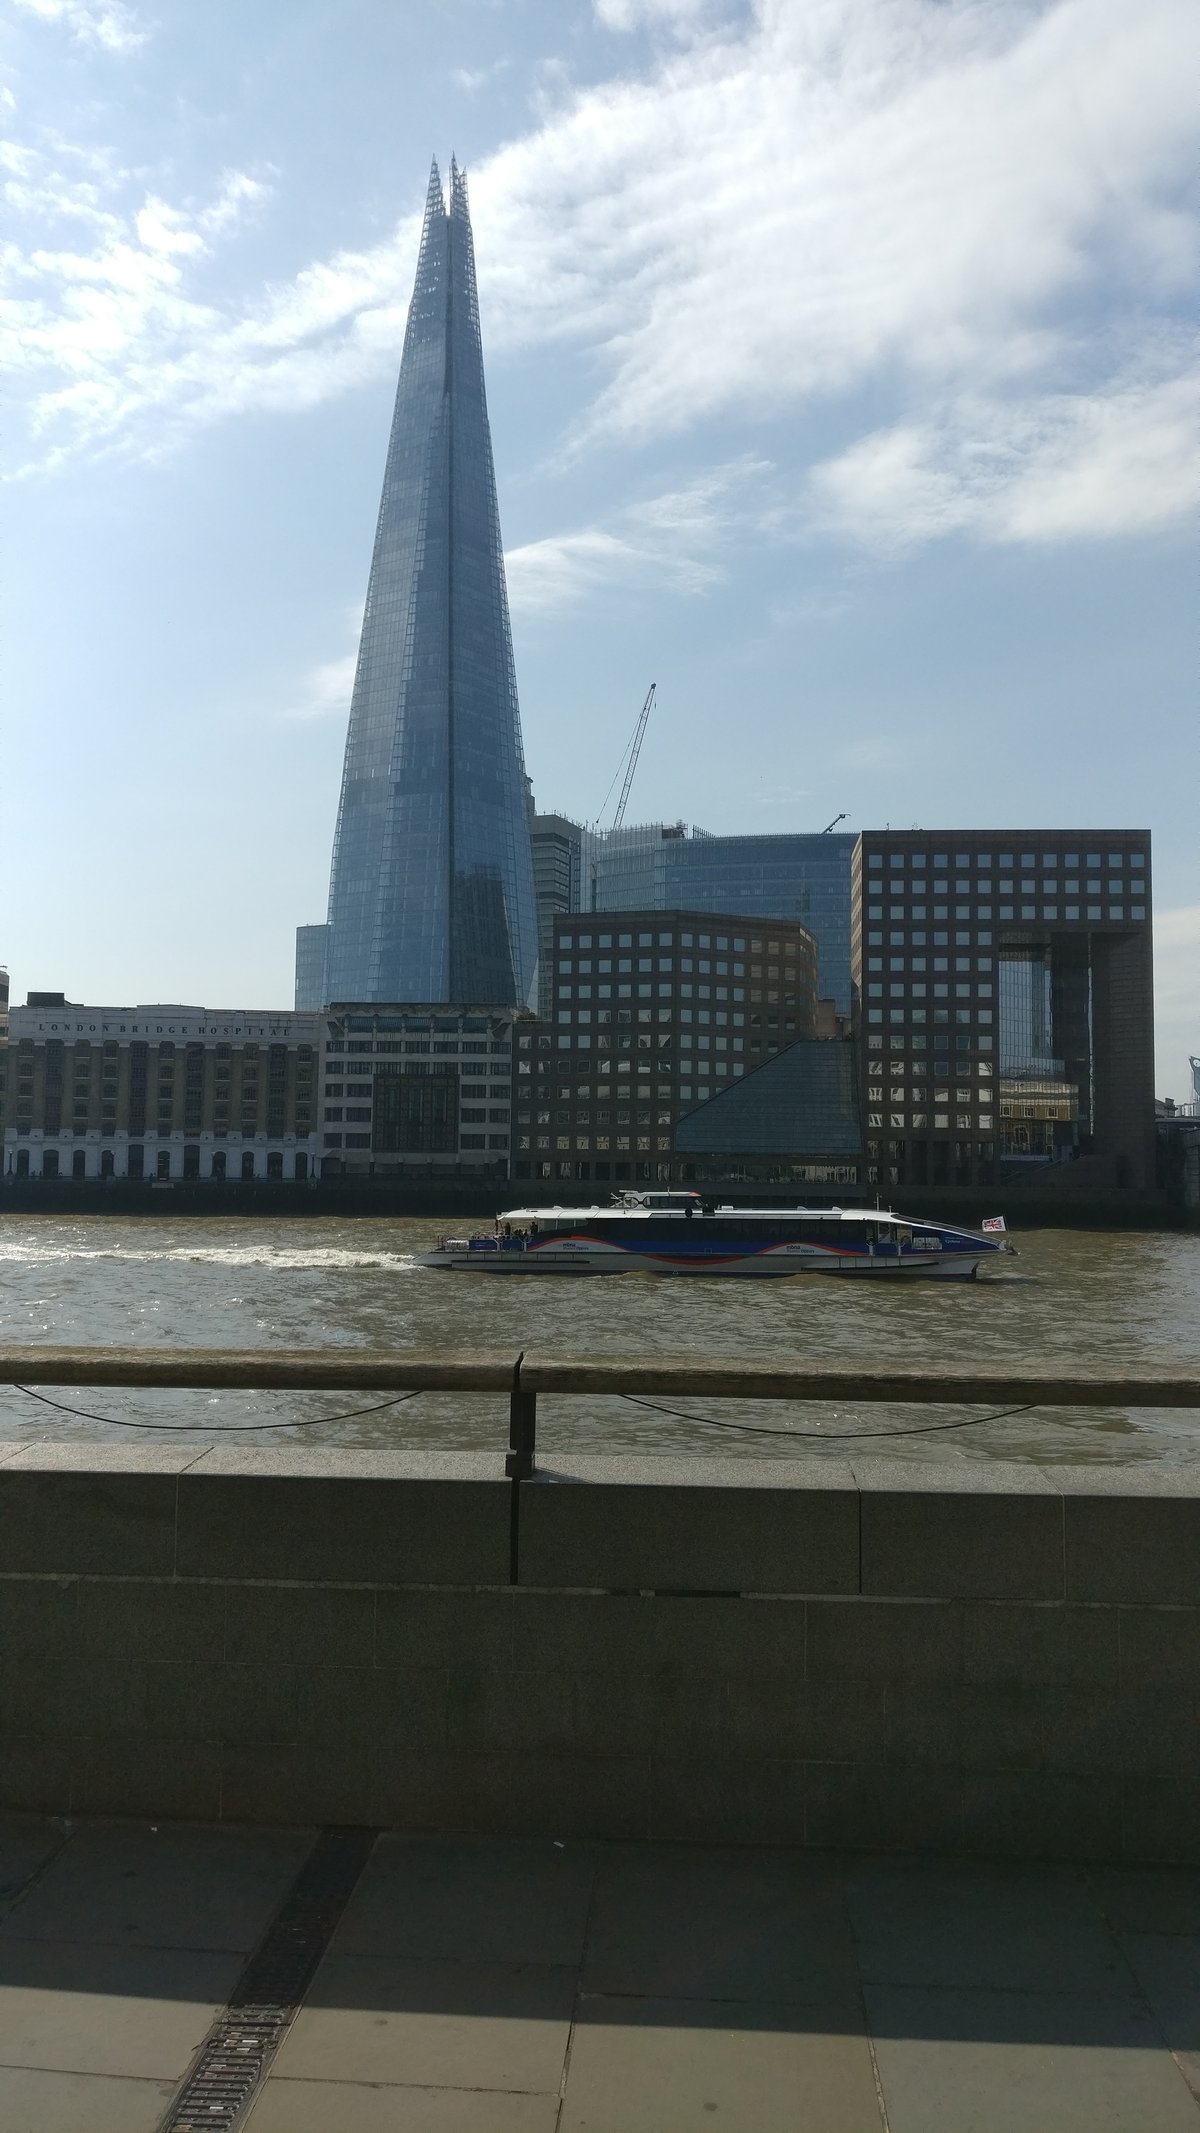 The Shard across the Thames